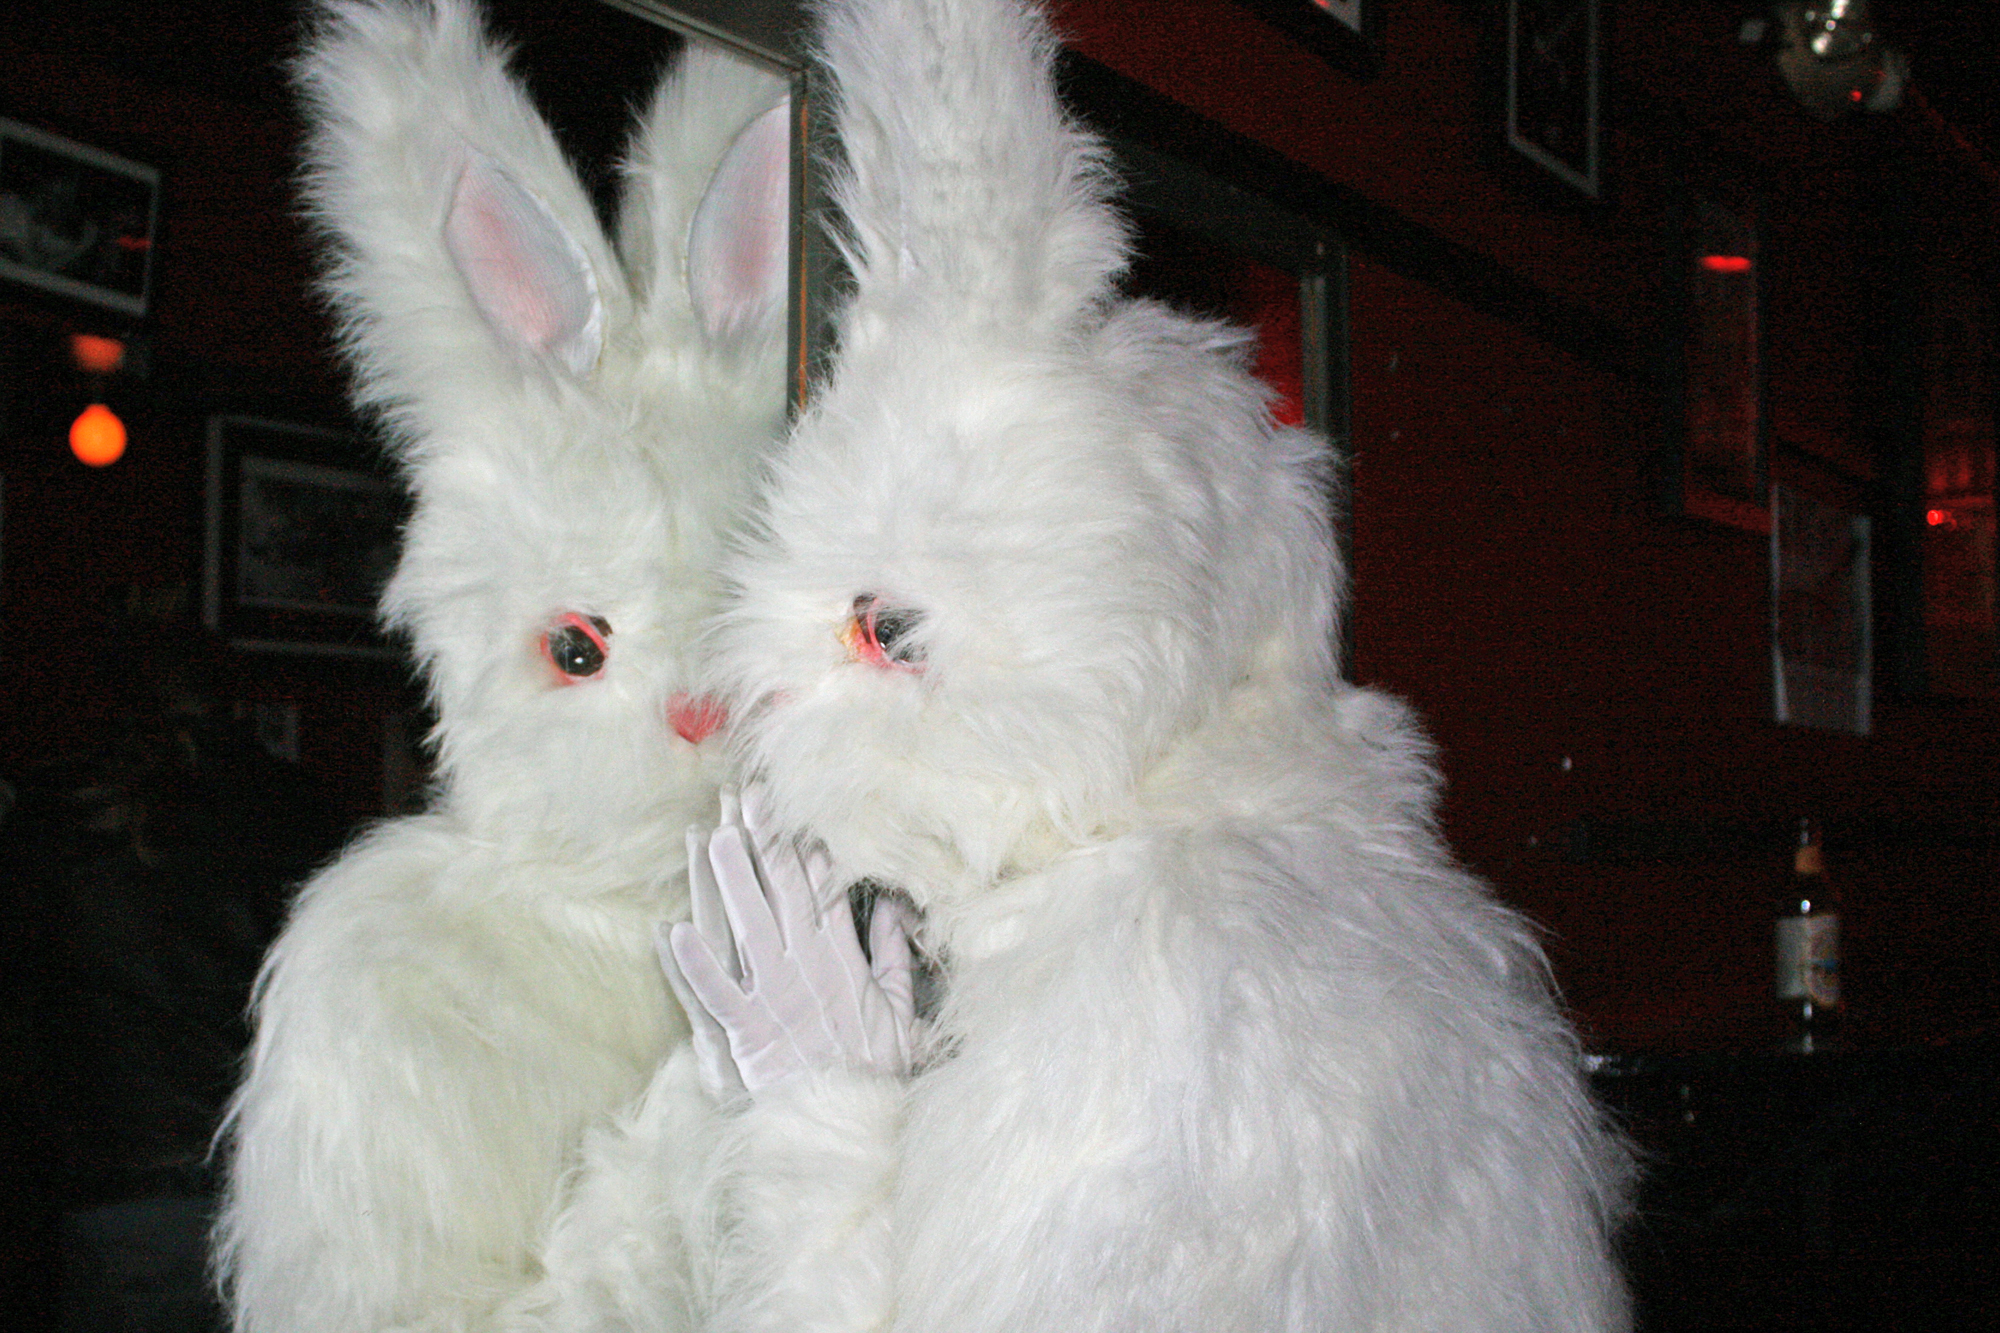 two white bunny costumes hugging each other with eyes wide open